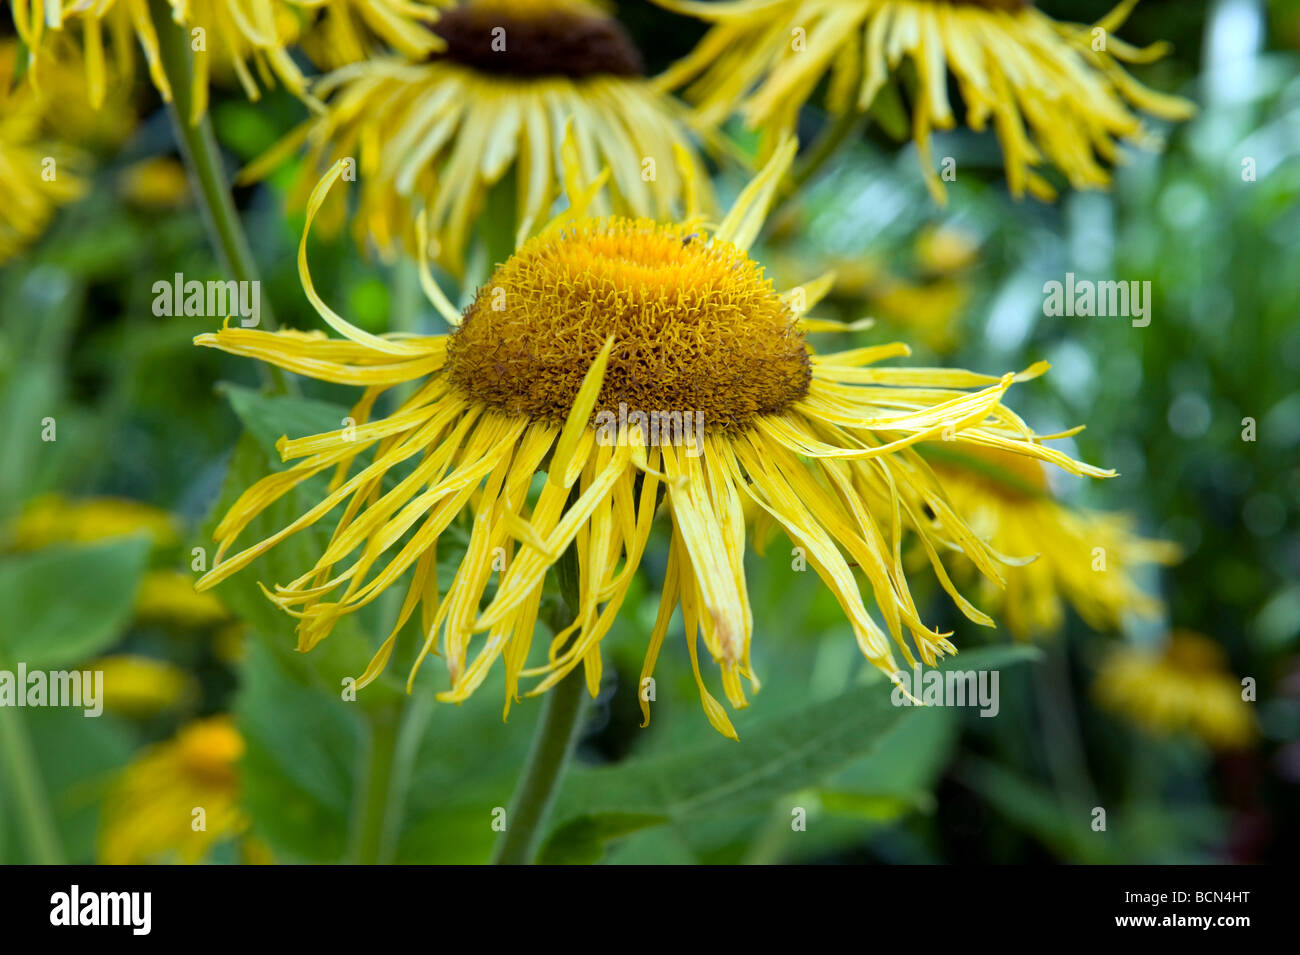 Asteraceae/Compositae Inula magnifica. A yellow flower with a domed seedhead & spiky petals. Stock Photo